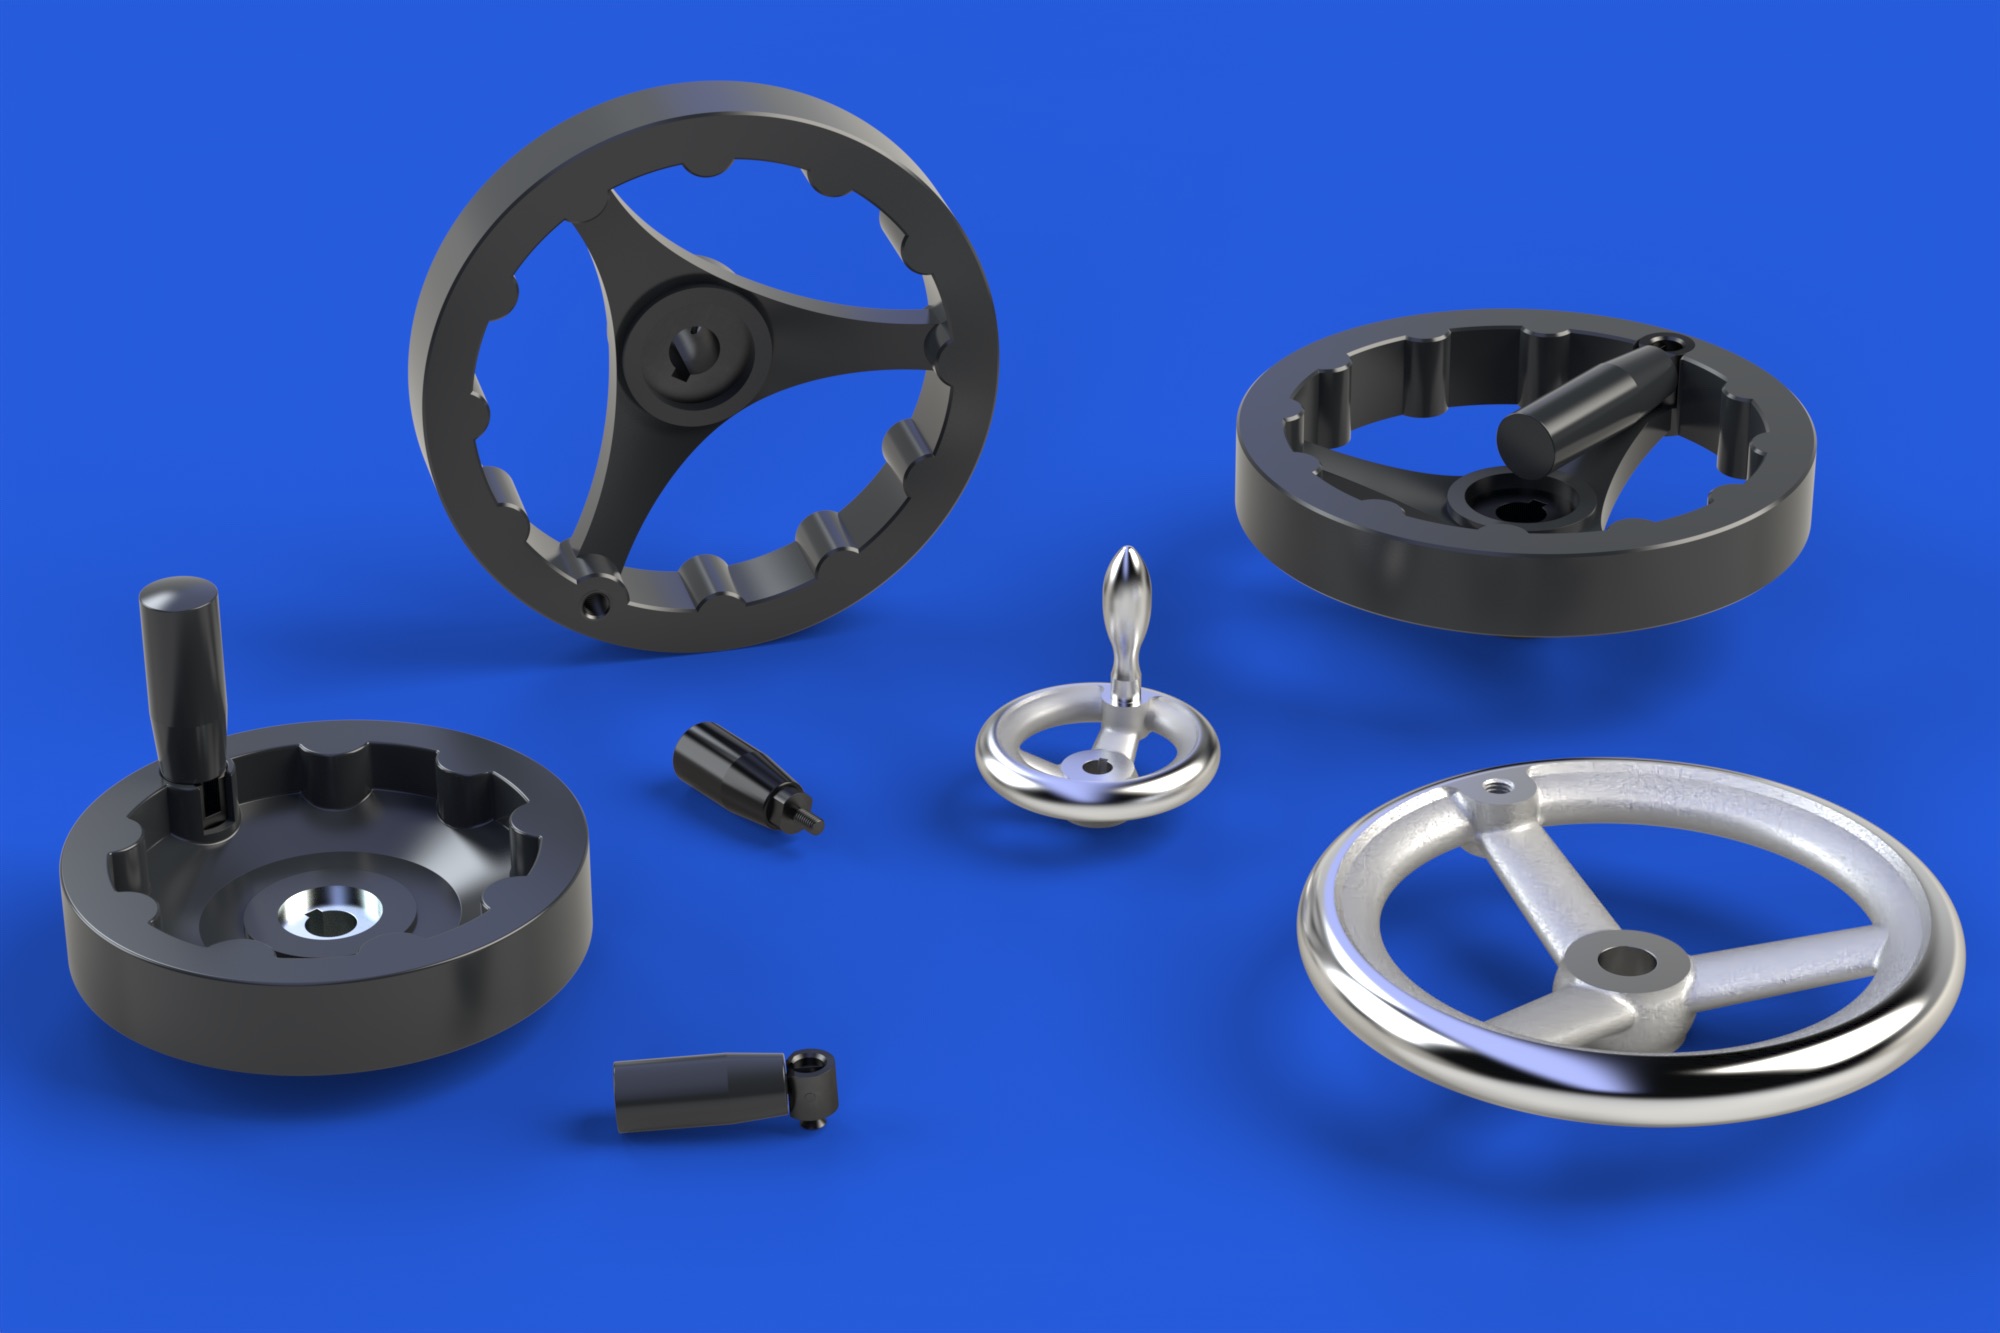 The new handwheels are constructed from glass reinforced polyamide with a black finish.